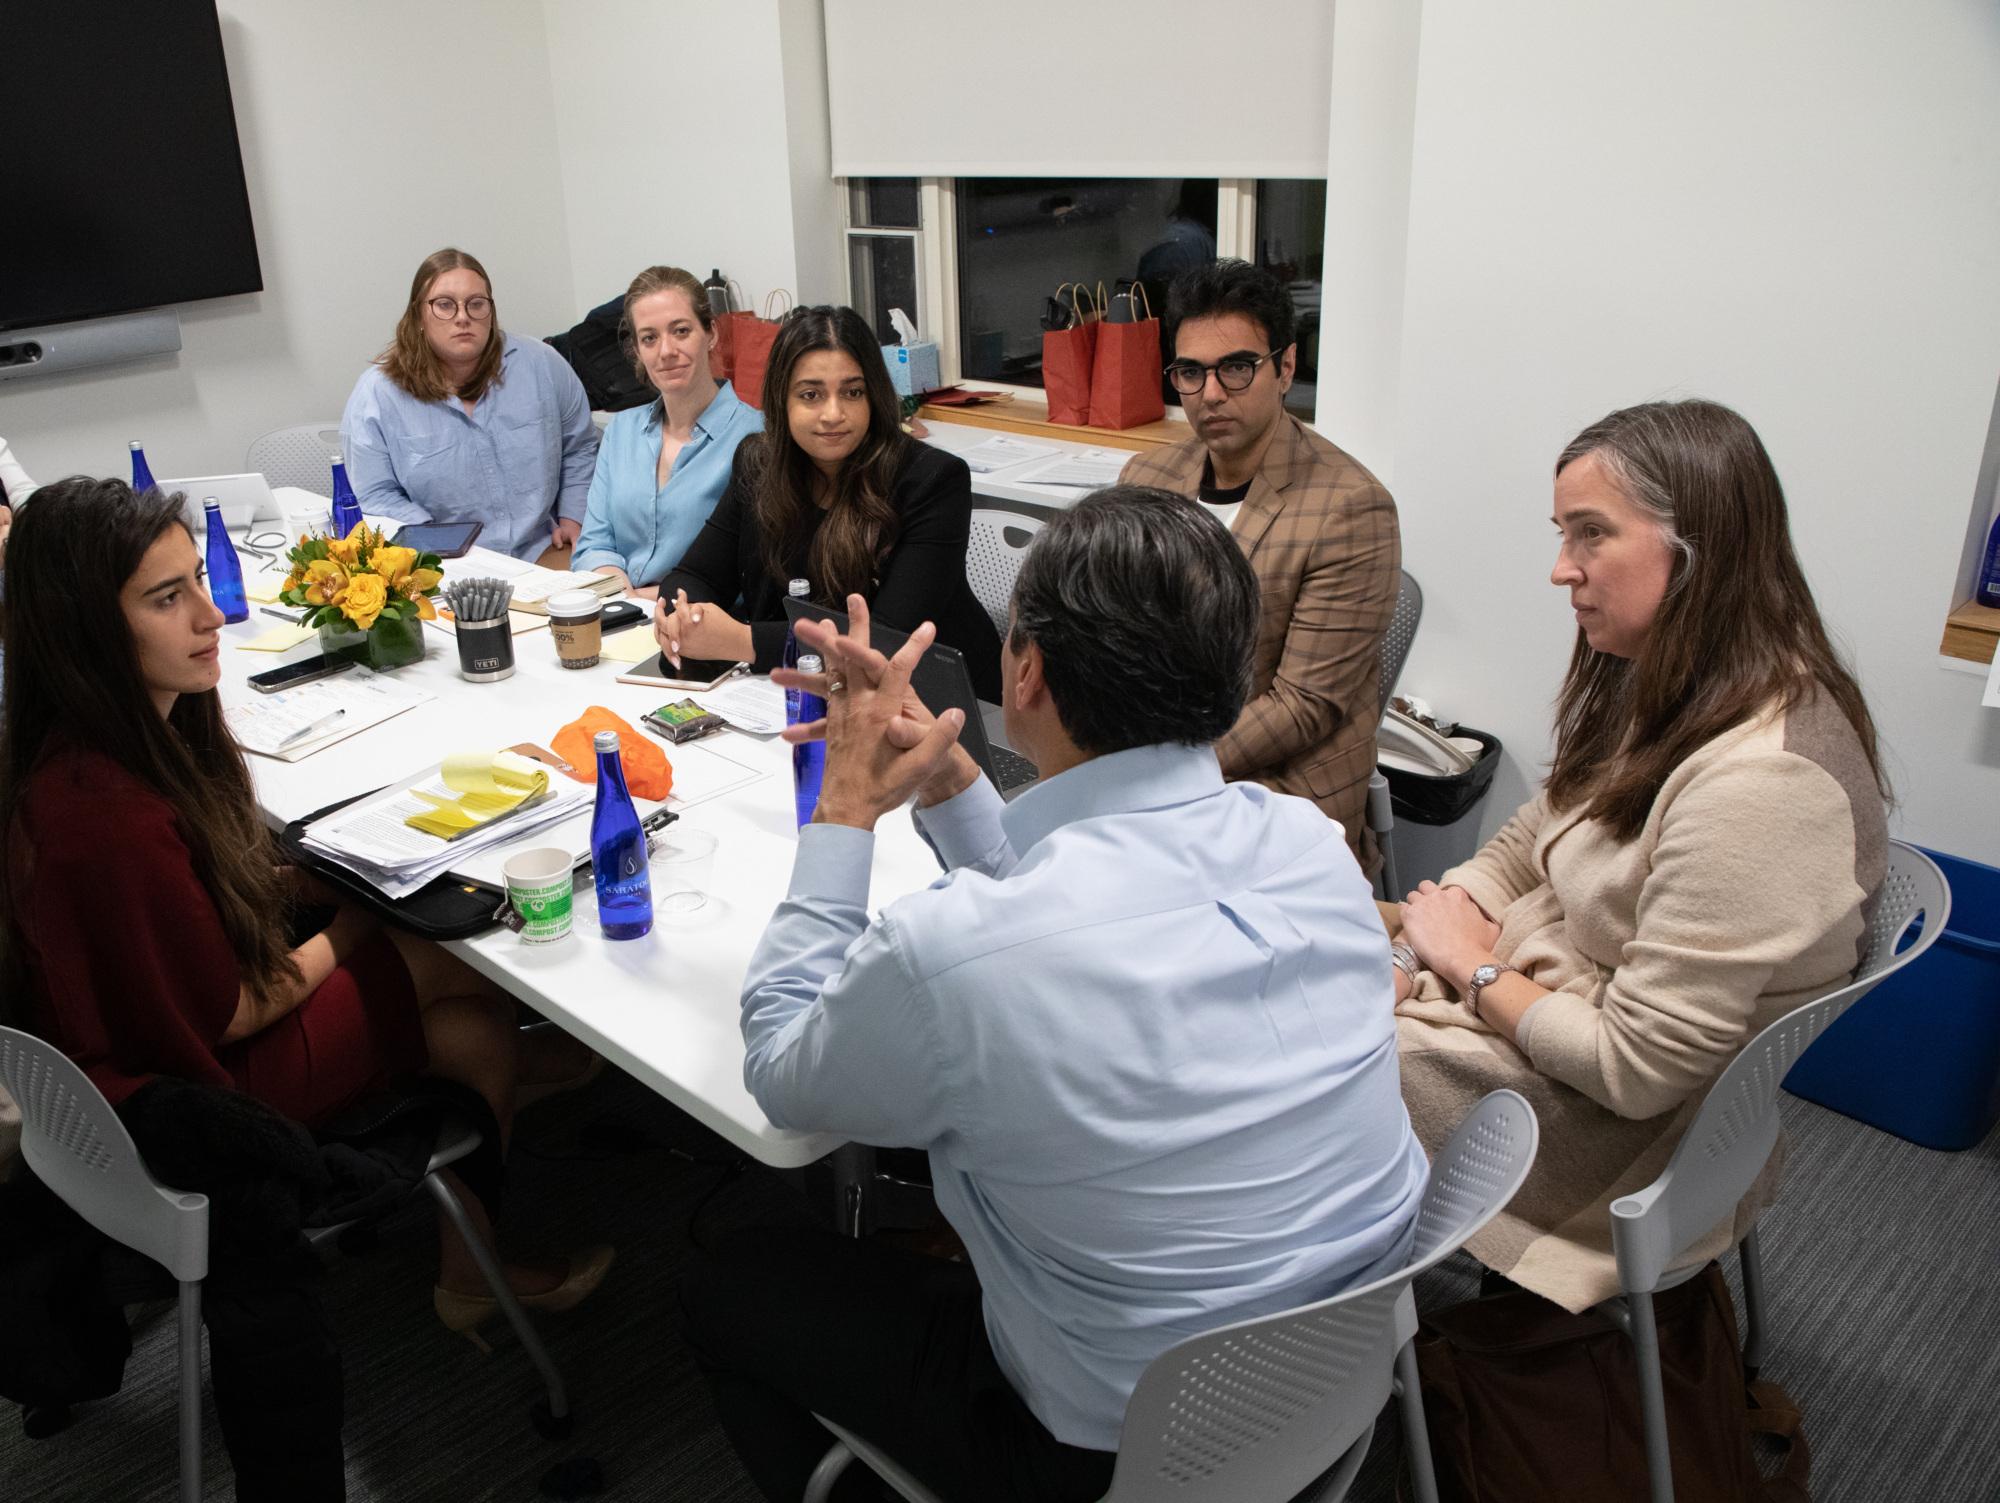 Affiliated students and fellows talk around a table